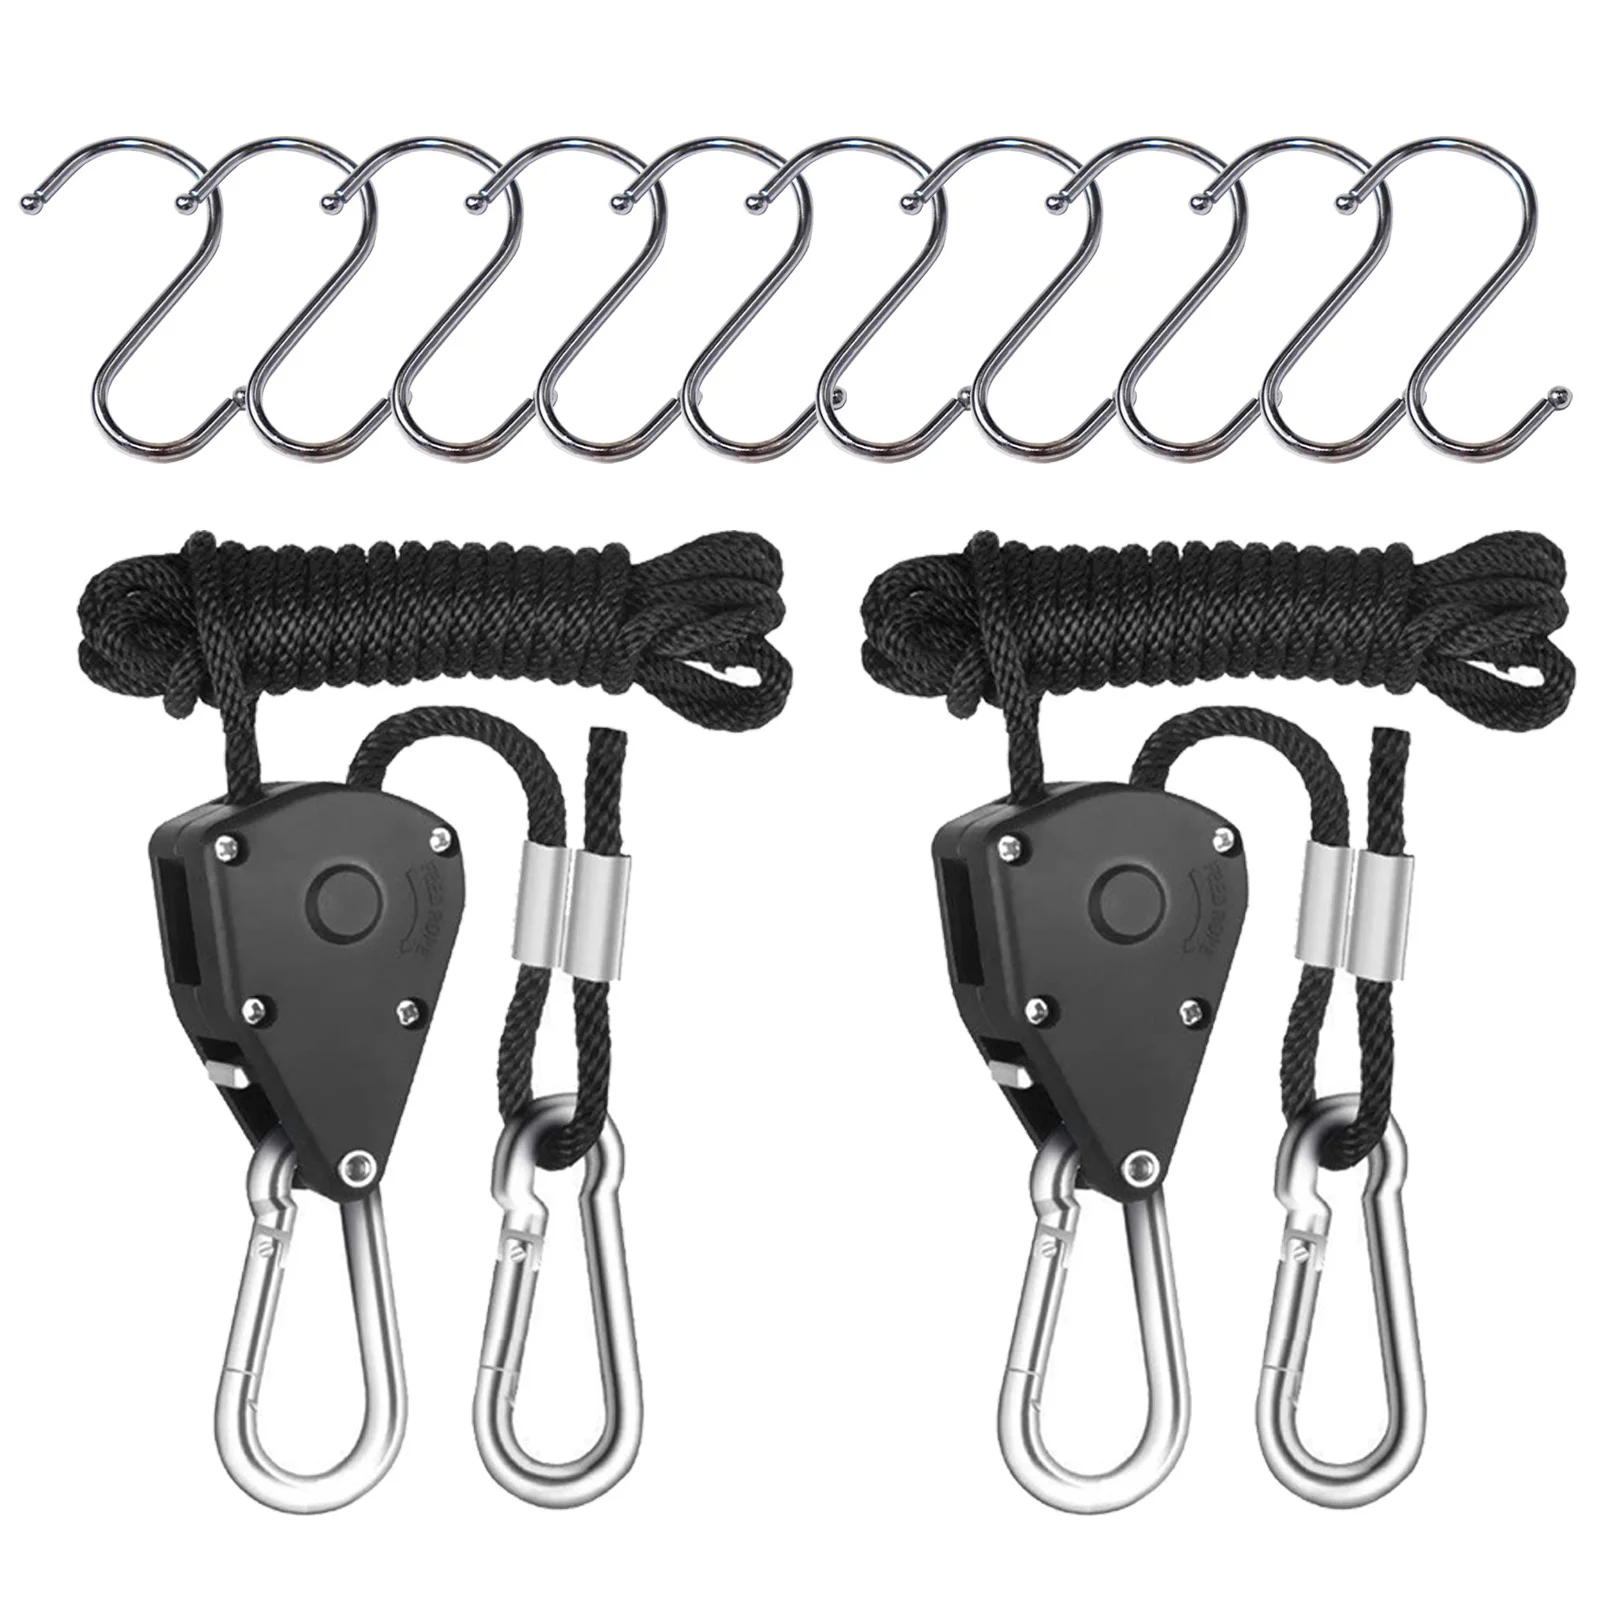 2pcs 1/8 Inch Adjustable Reinforced Hangers Hanging Ratchet Pulley Grow Duty  Rope Pulley Duty Clip Plant Grow Ropes - AliExpress